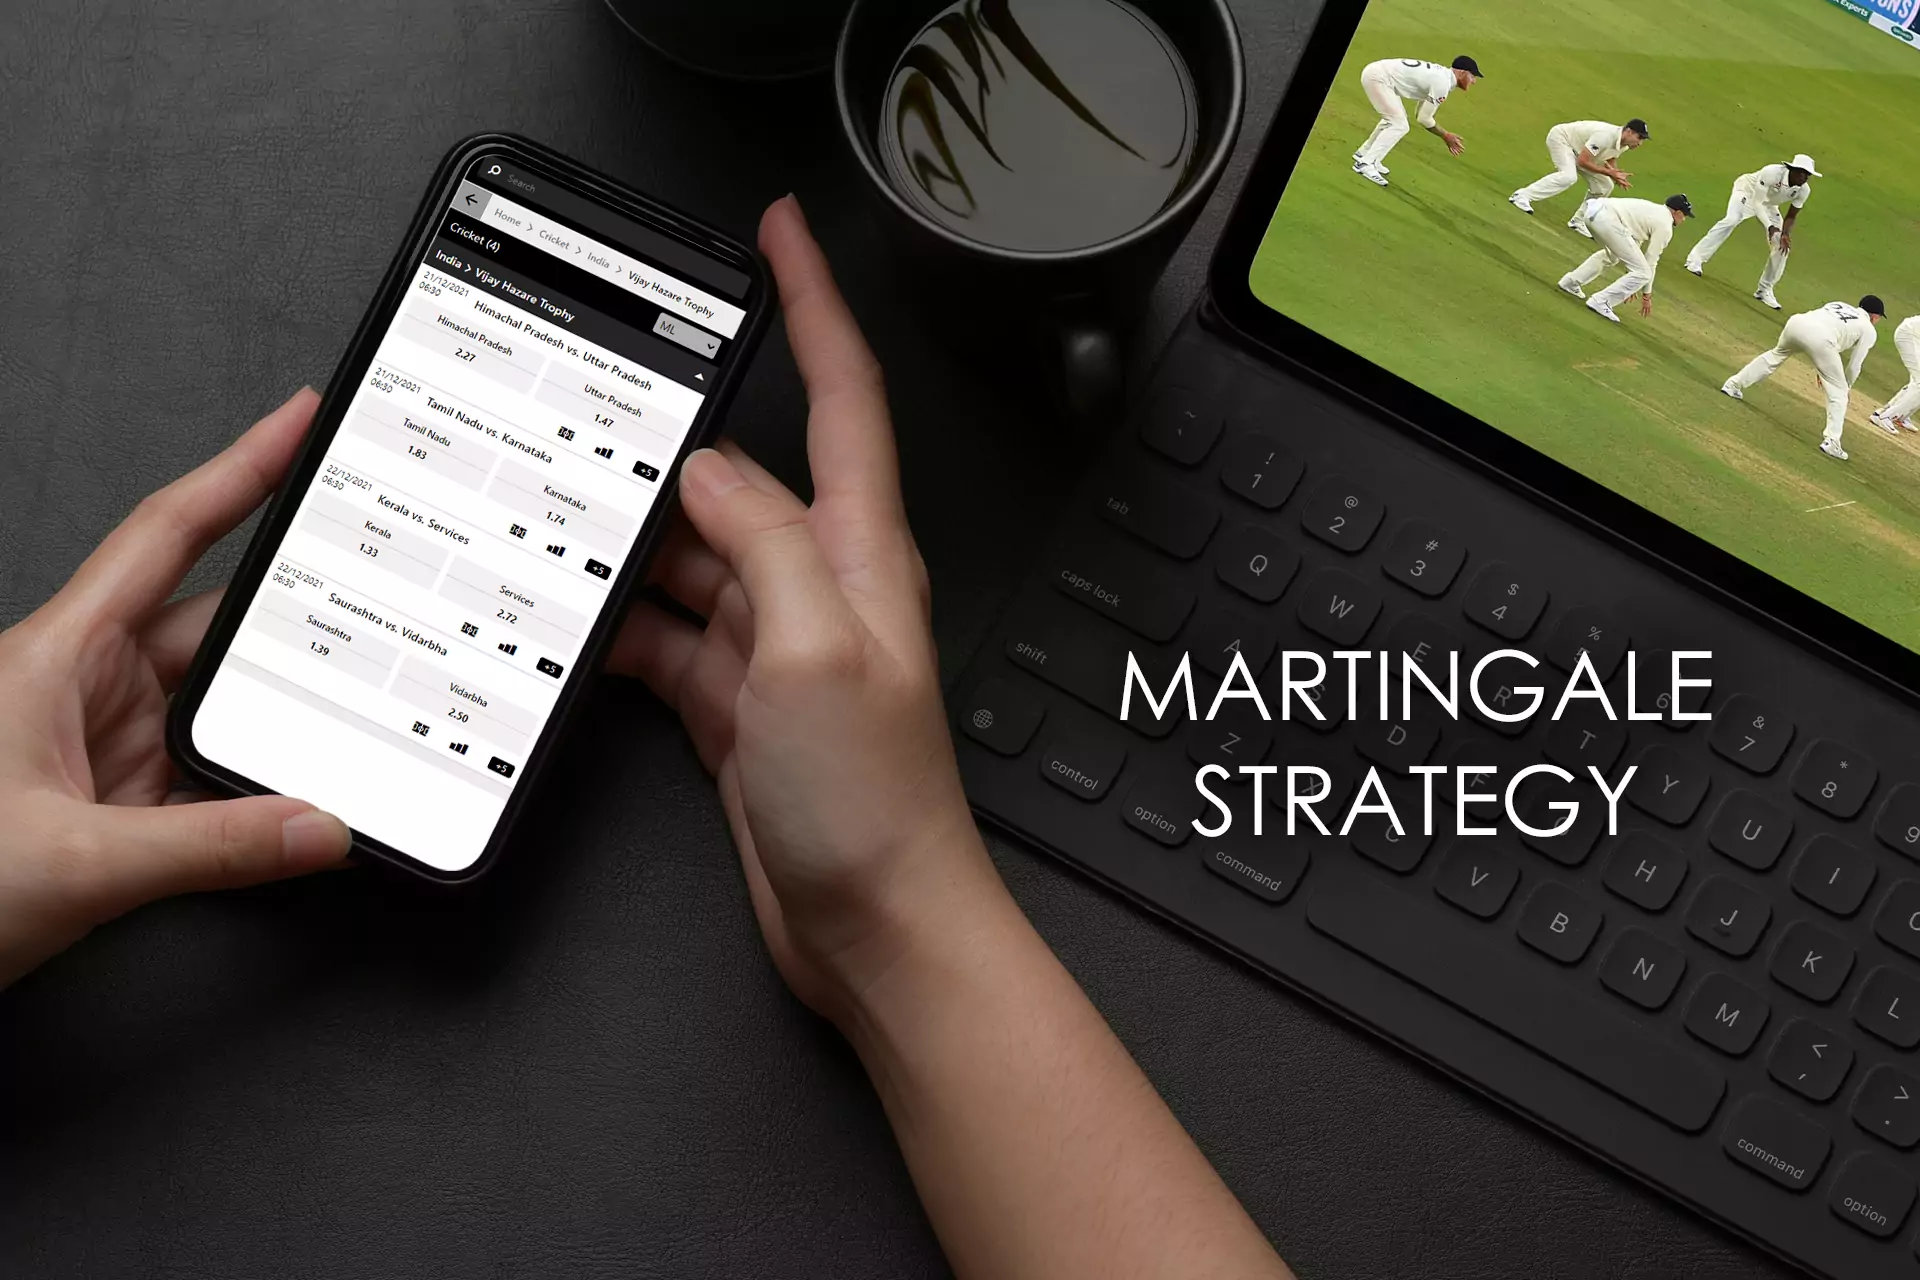 Martingale strategy is a variant of Dogon Betting Strategy.